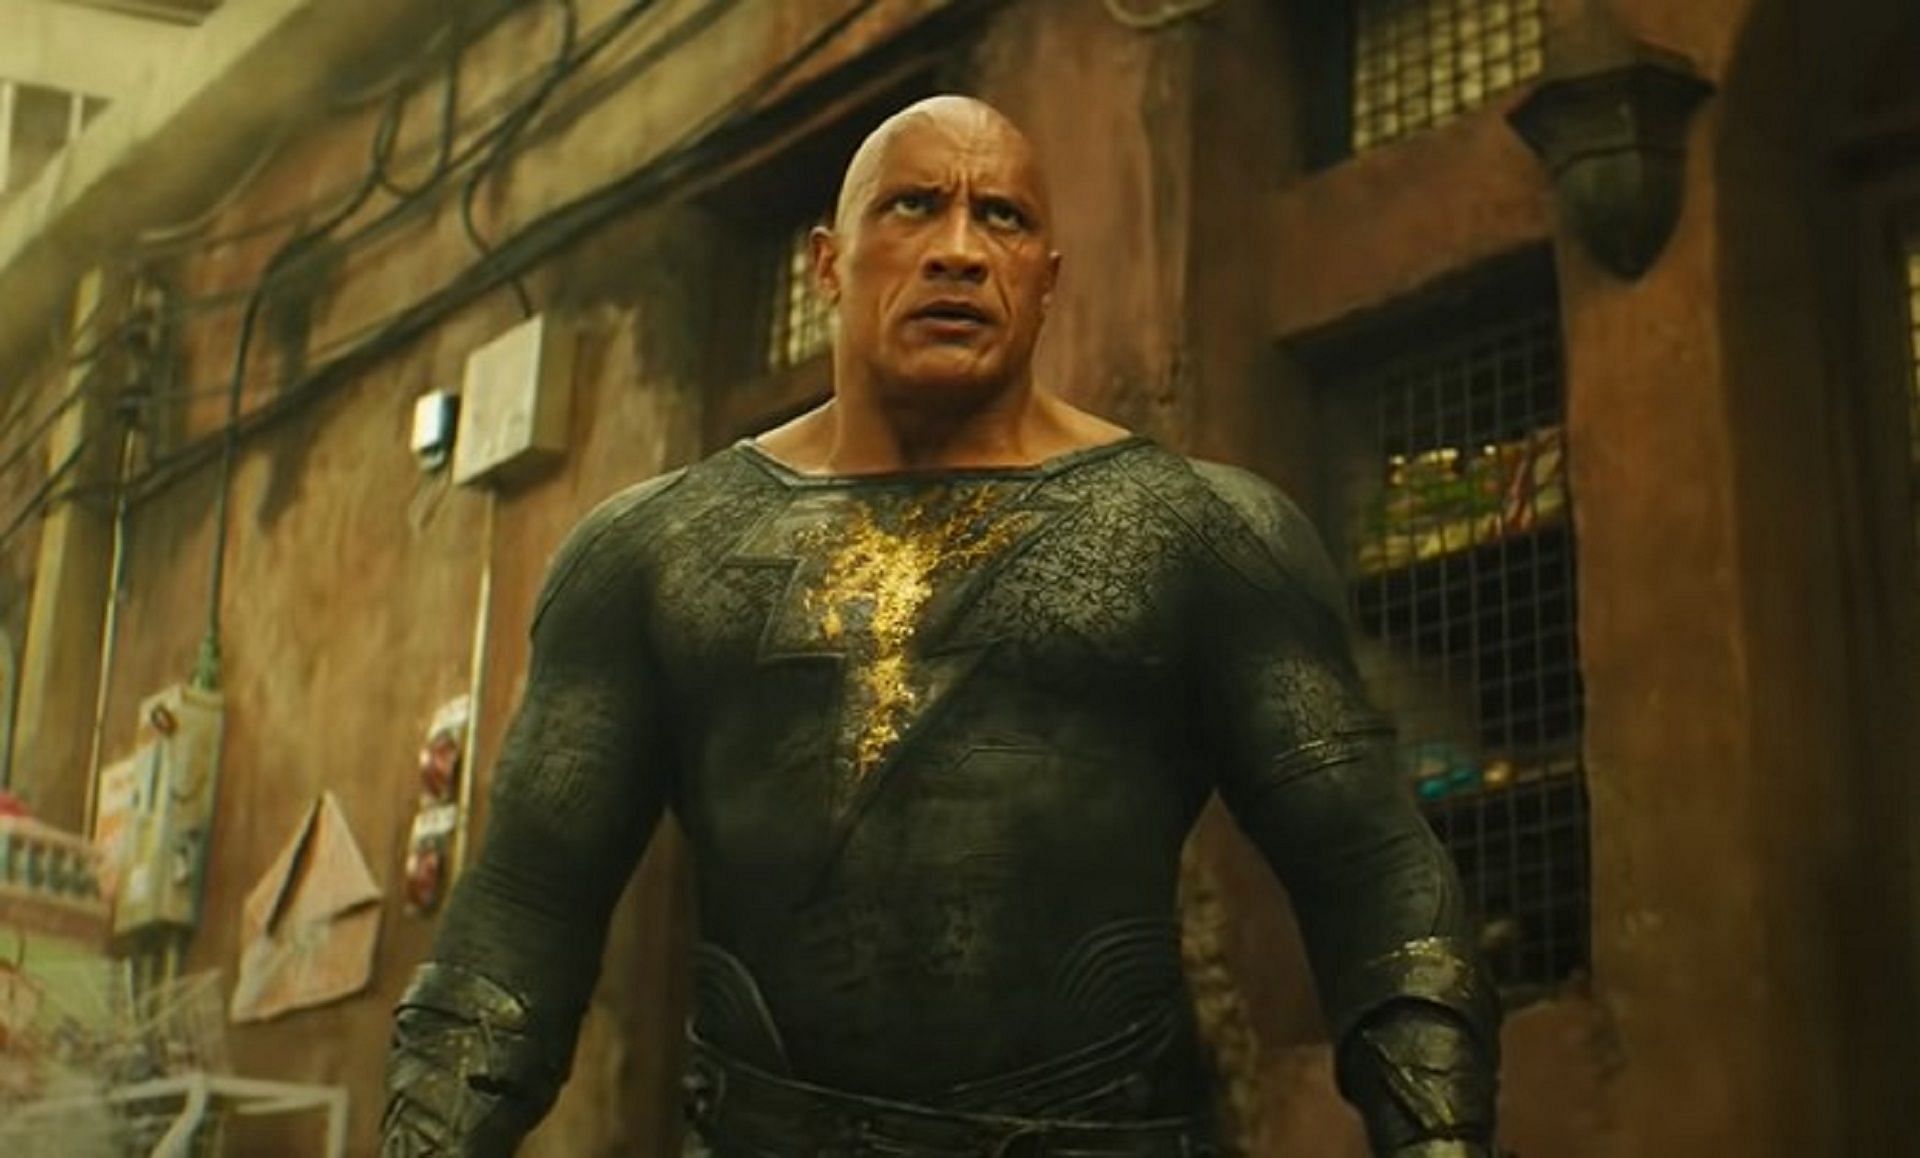 Dwayne Johnson will be portraying the anti-hero Black Adam in the upcoming solo movie (image via DC)